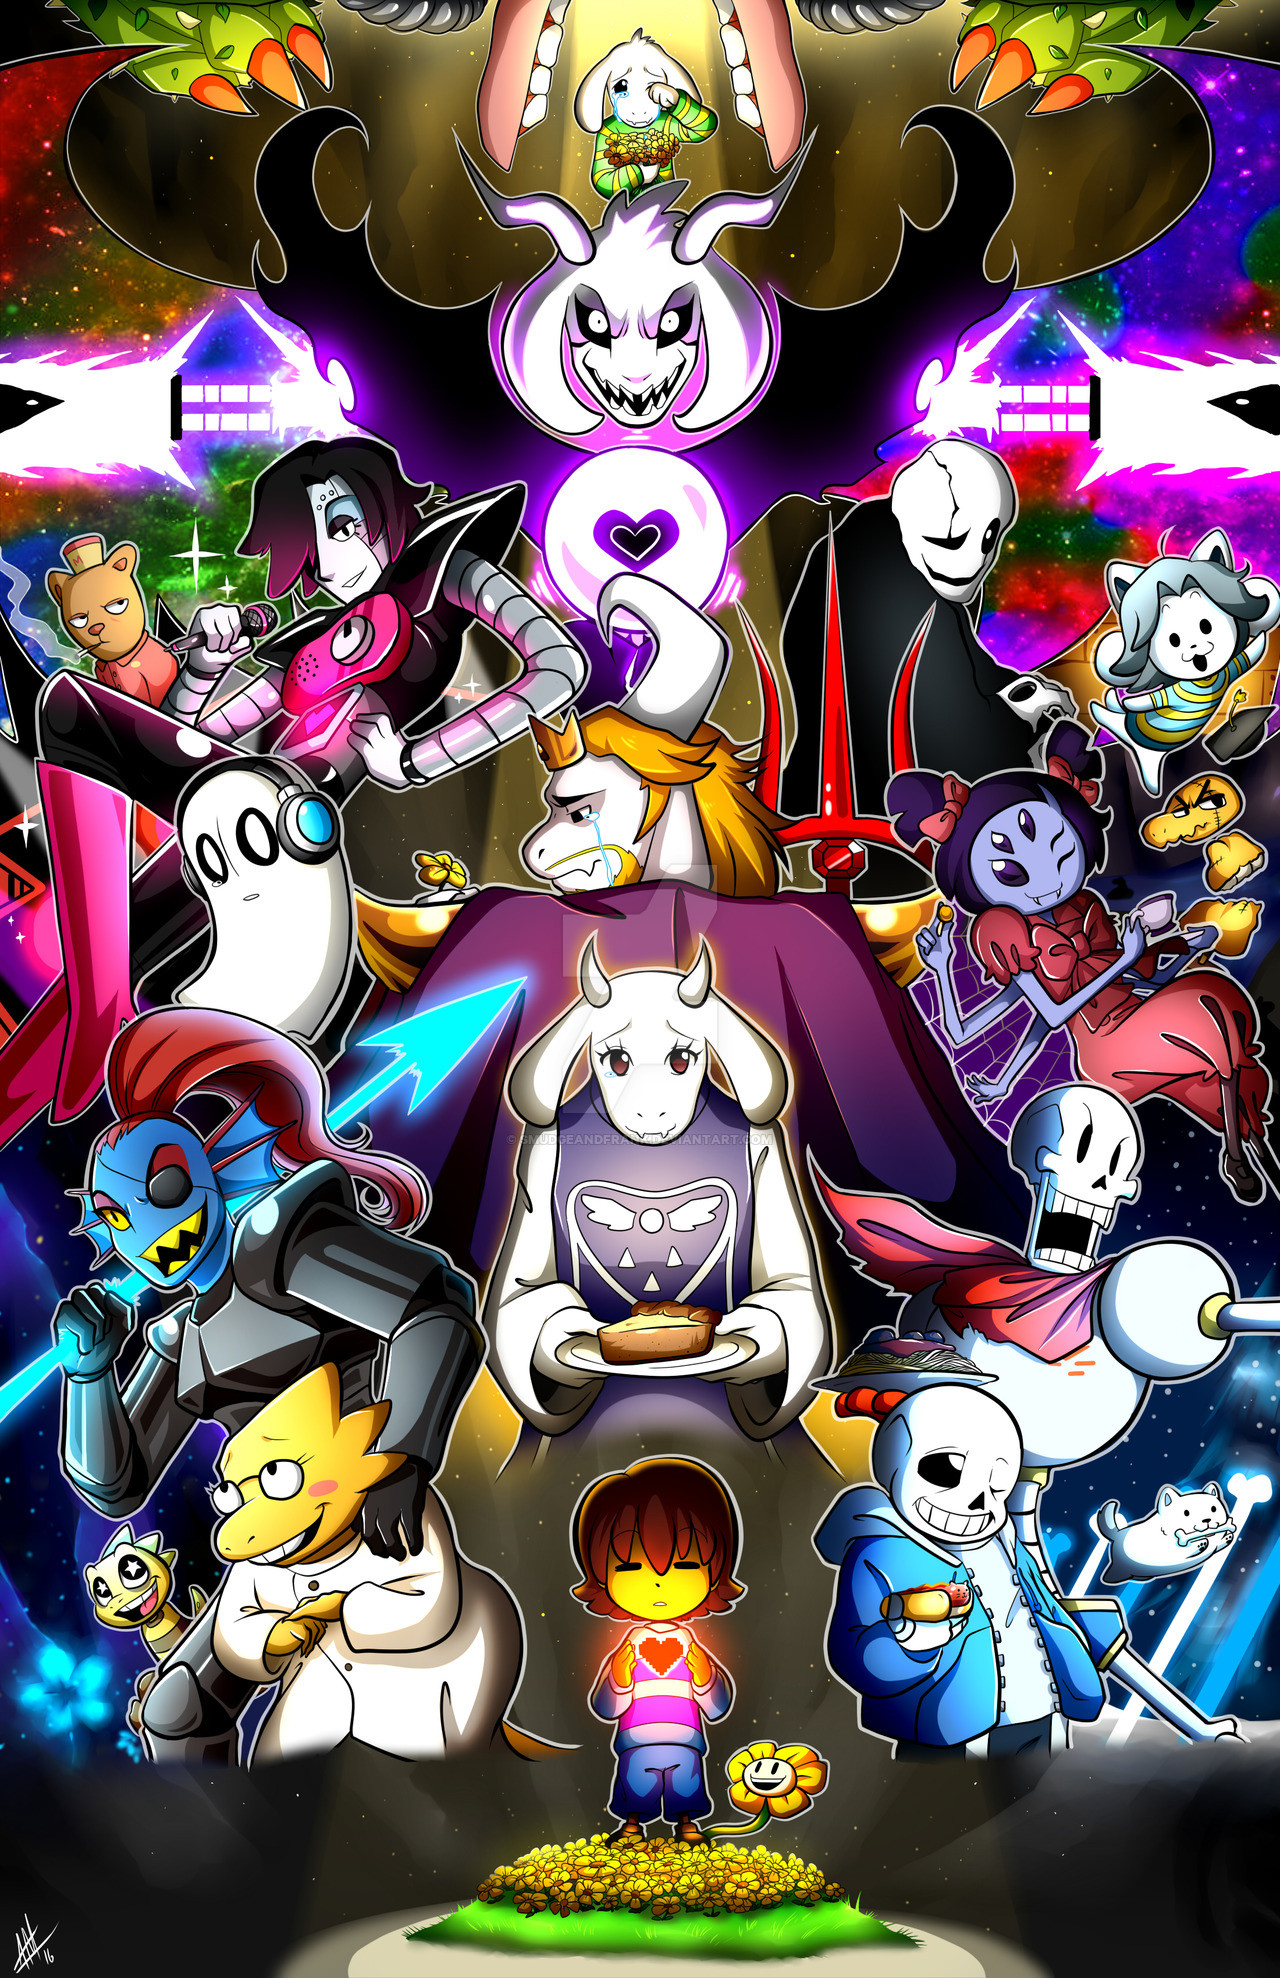 UNDERTALE-The Game images Undertale HD wallpaper and background photos